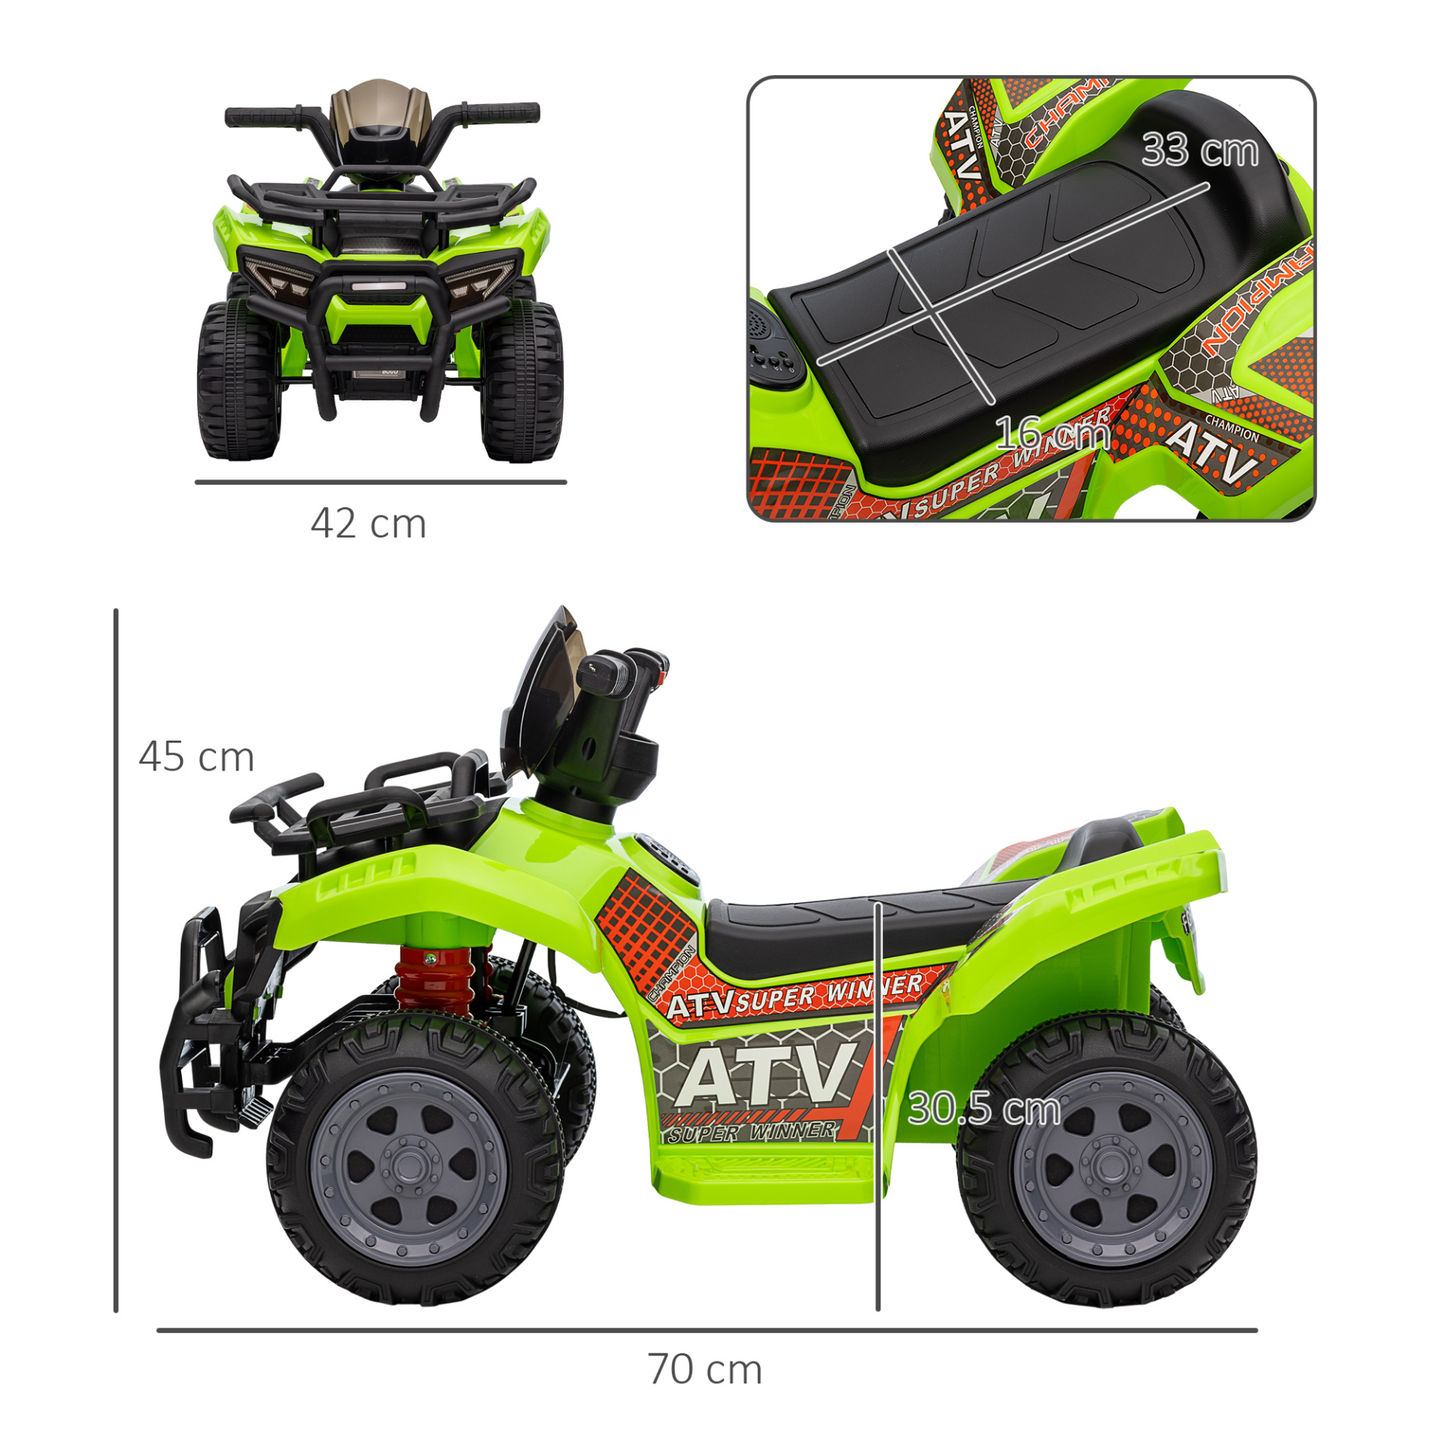 HOMCOM 6V Kids Electric Ride on Car Toddlers Quad Bike ATV Toy With Music for 18-36 months Green